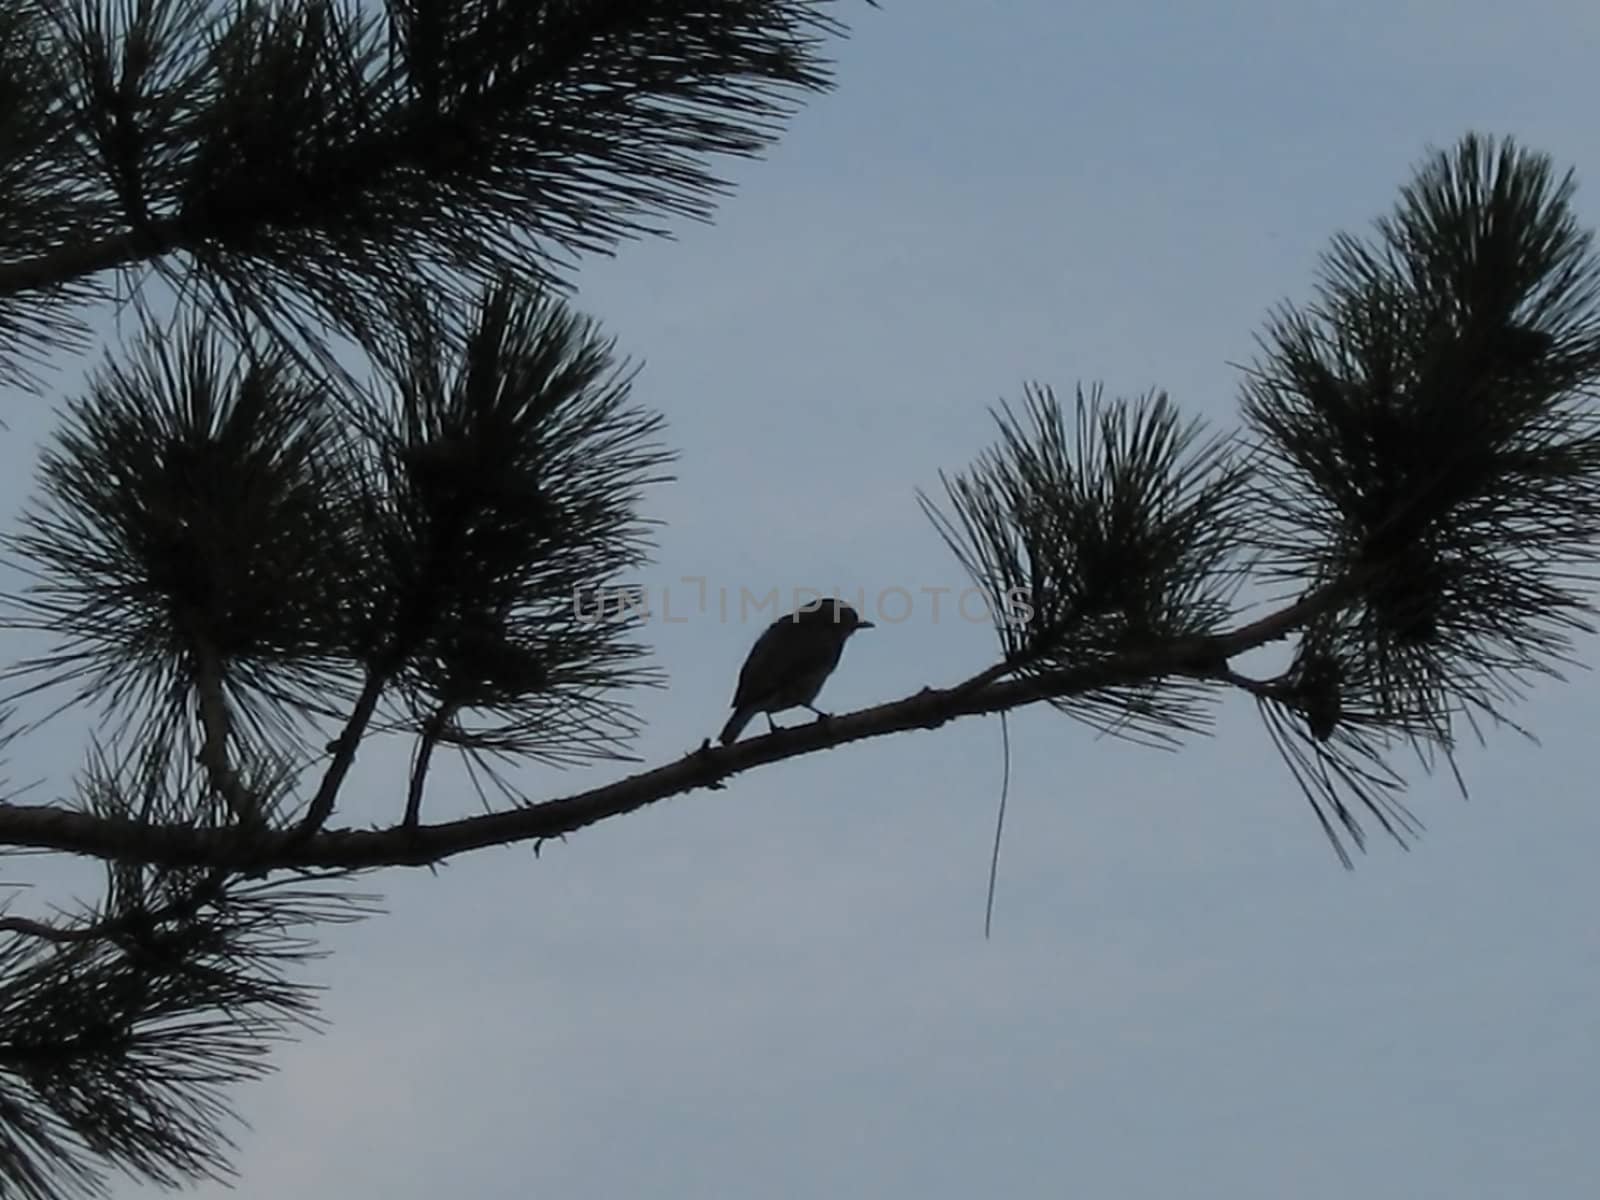 A photograph of a bird perched on pine branch.